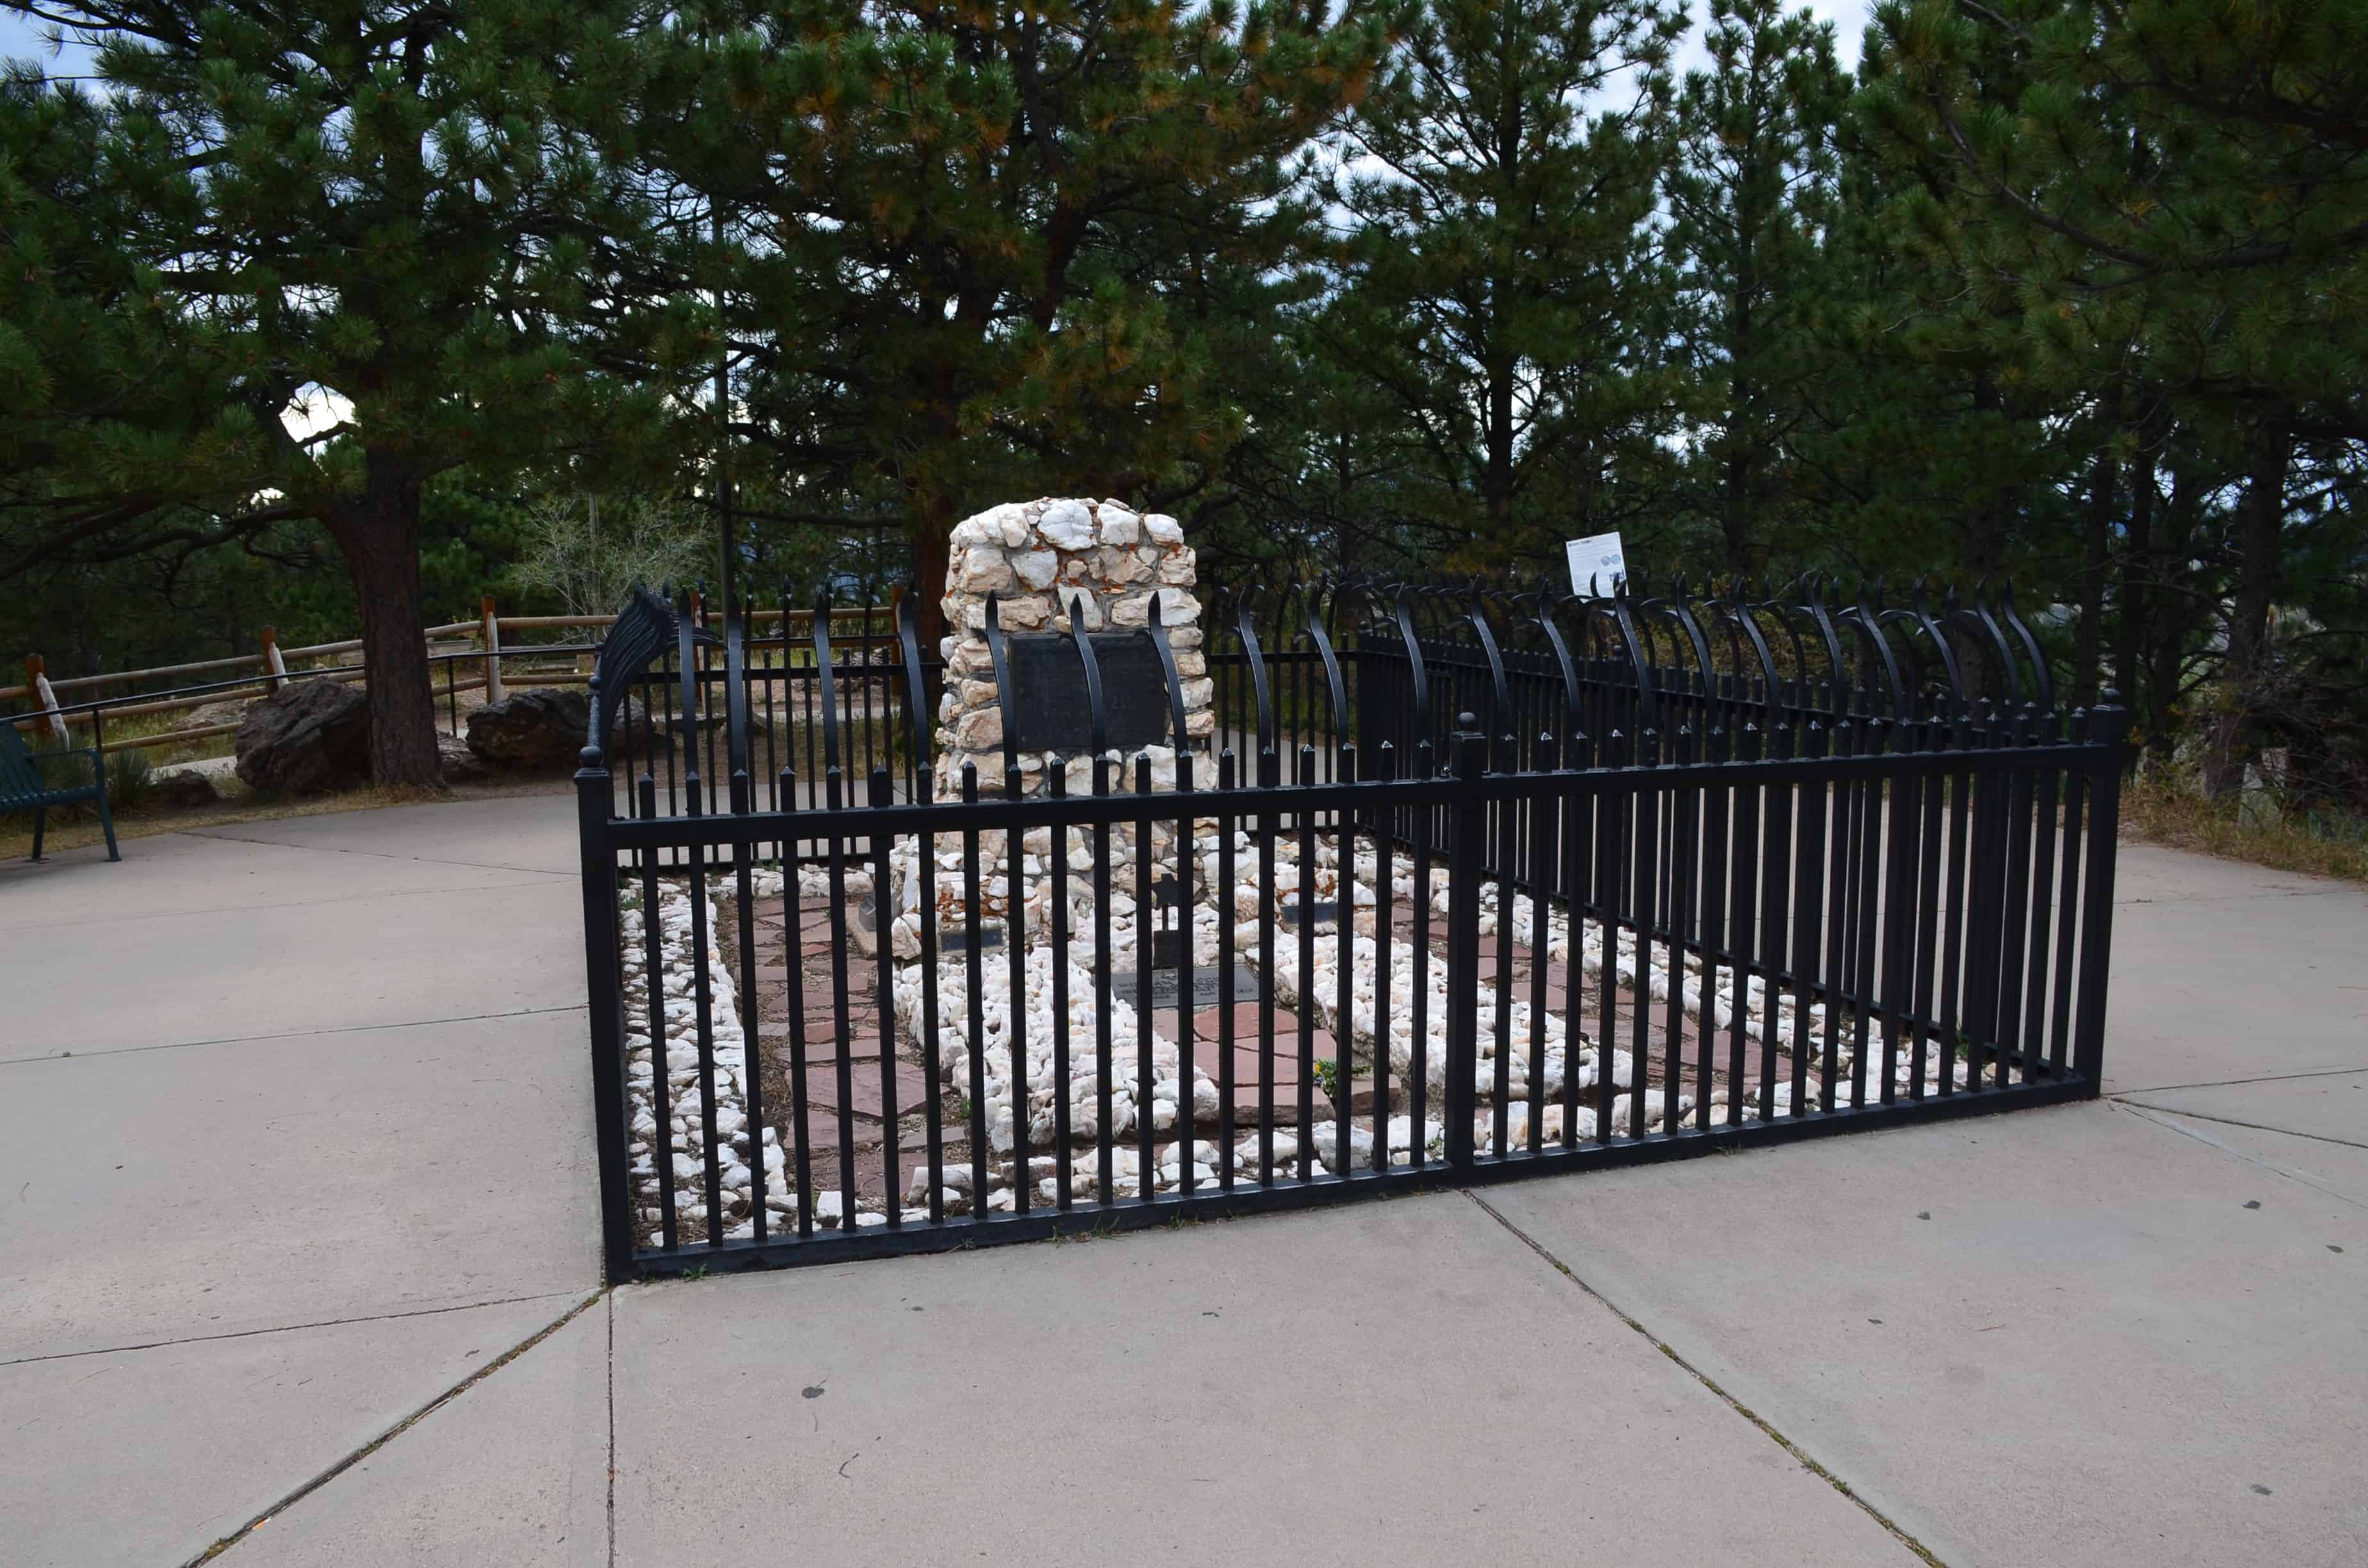 Grave of Buffalo Bill Cody on Lookout Mountain along the Lariat Loop National Scenic Byway in Colorado